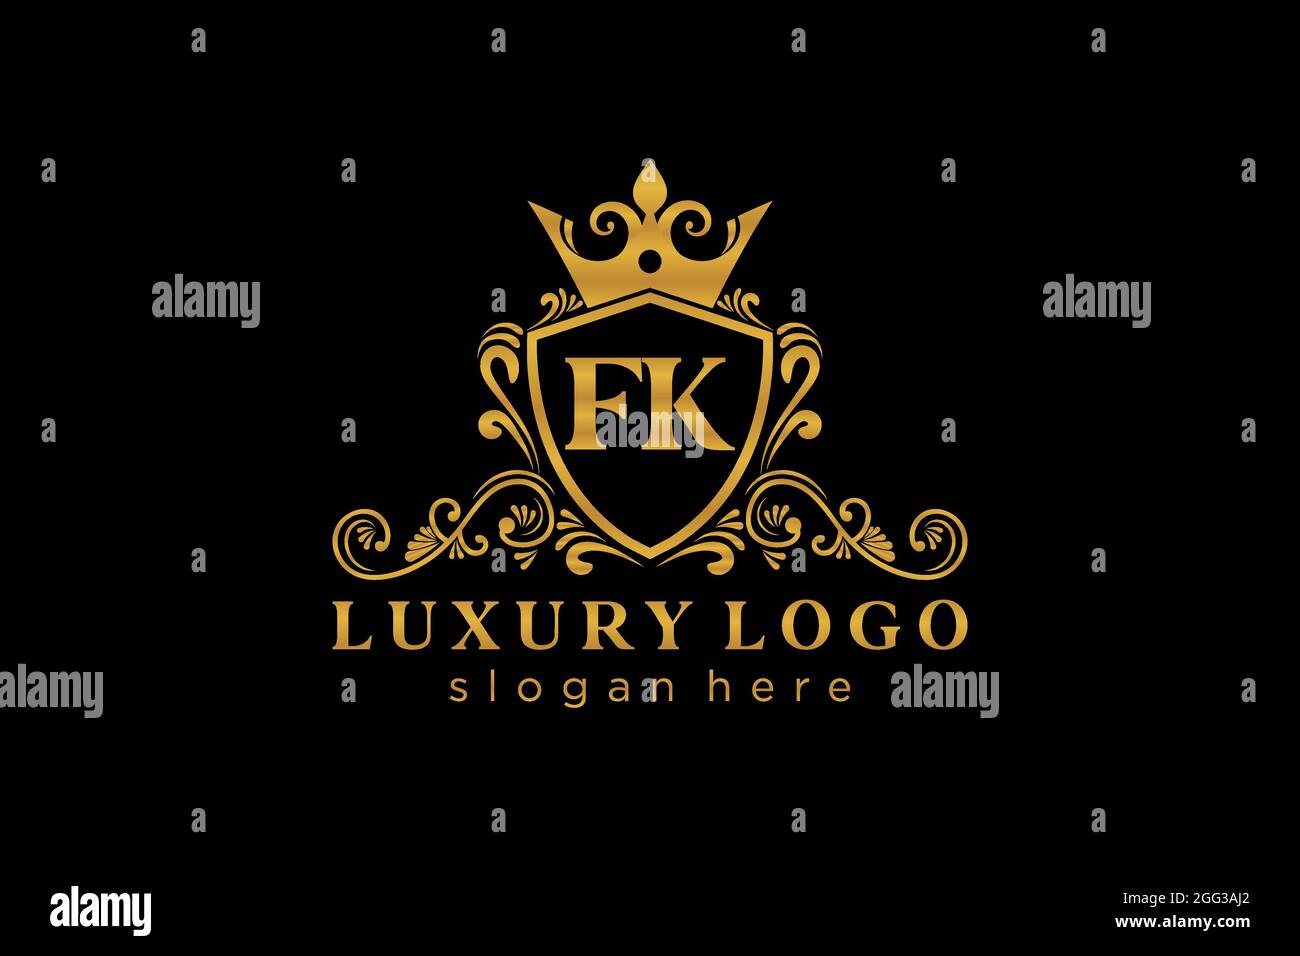 FK Letter Royal Luxury Logo template in vector art for Restaurant, Royalty, Boutique, Cafe, Hotel, Heraldic, Jewelry, Fashion and other vector illustr Stock Vector